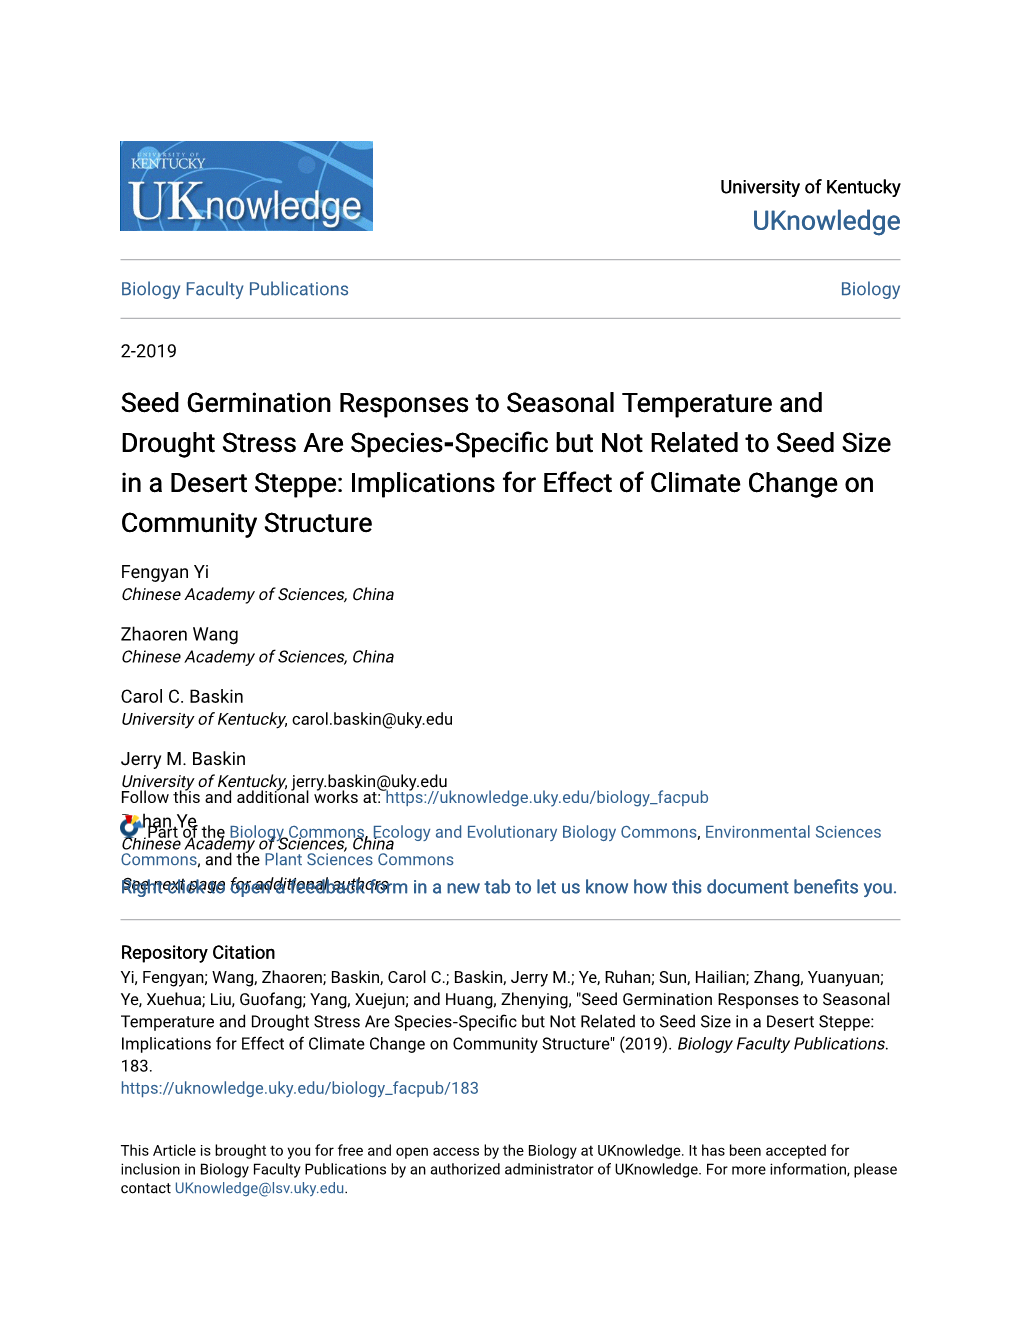 Seed Germination Responses to Seasonal Temperature And